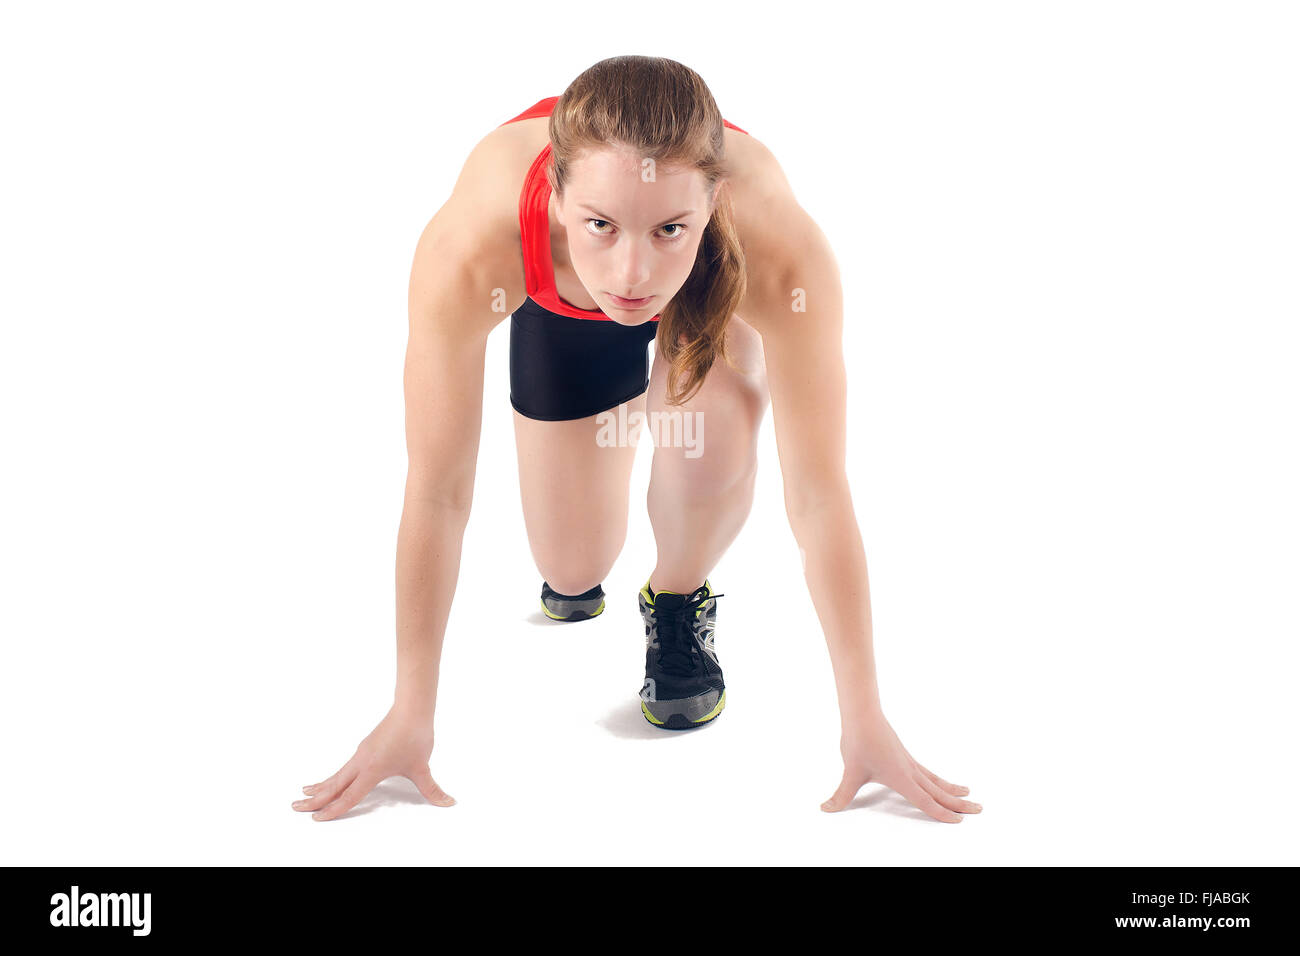 Young athletic woman in crouched starting position ready to start race. Isolated on white background. Stock Photo